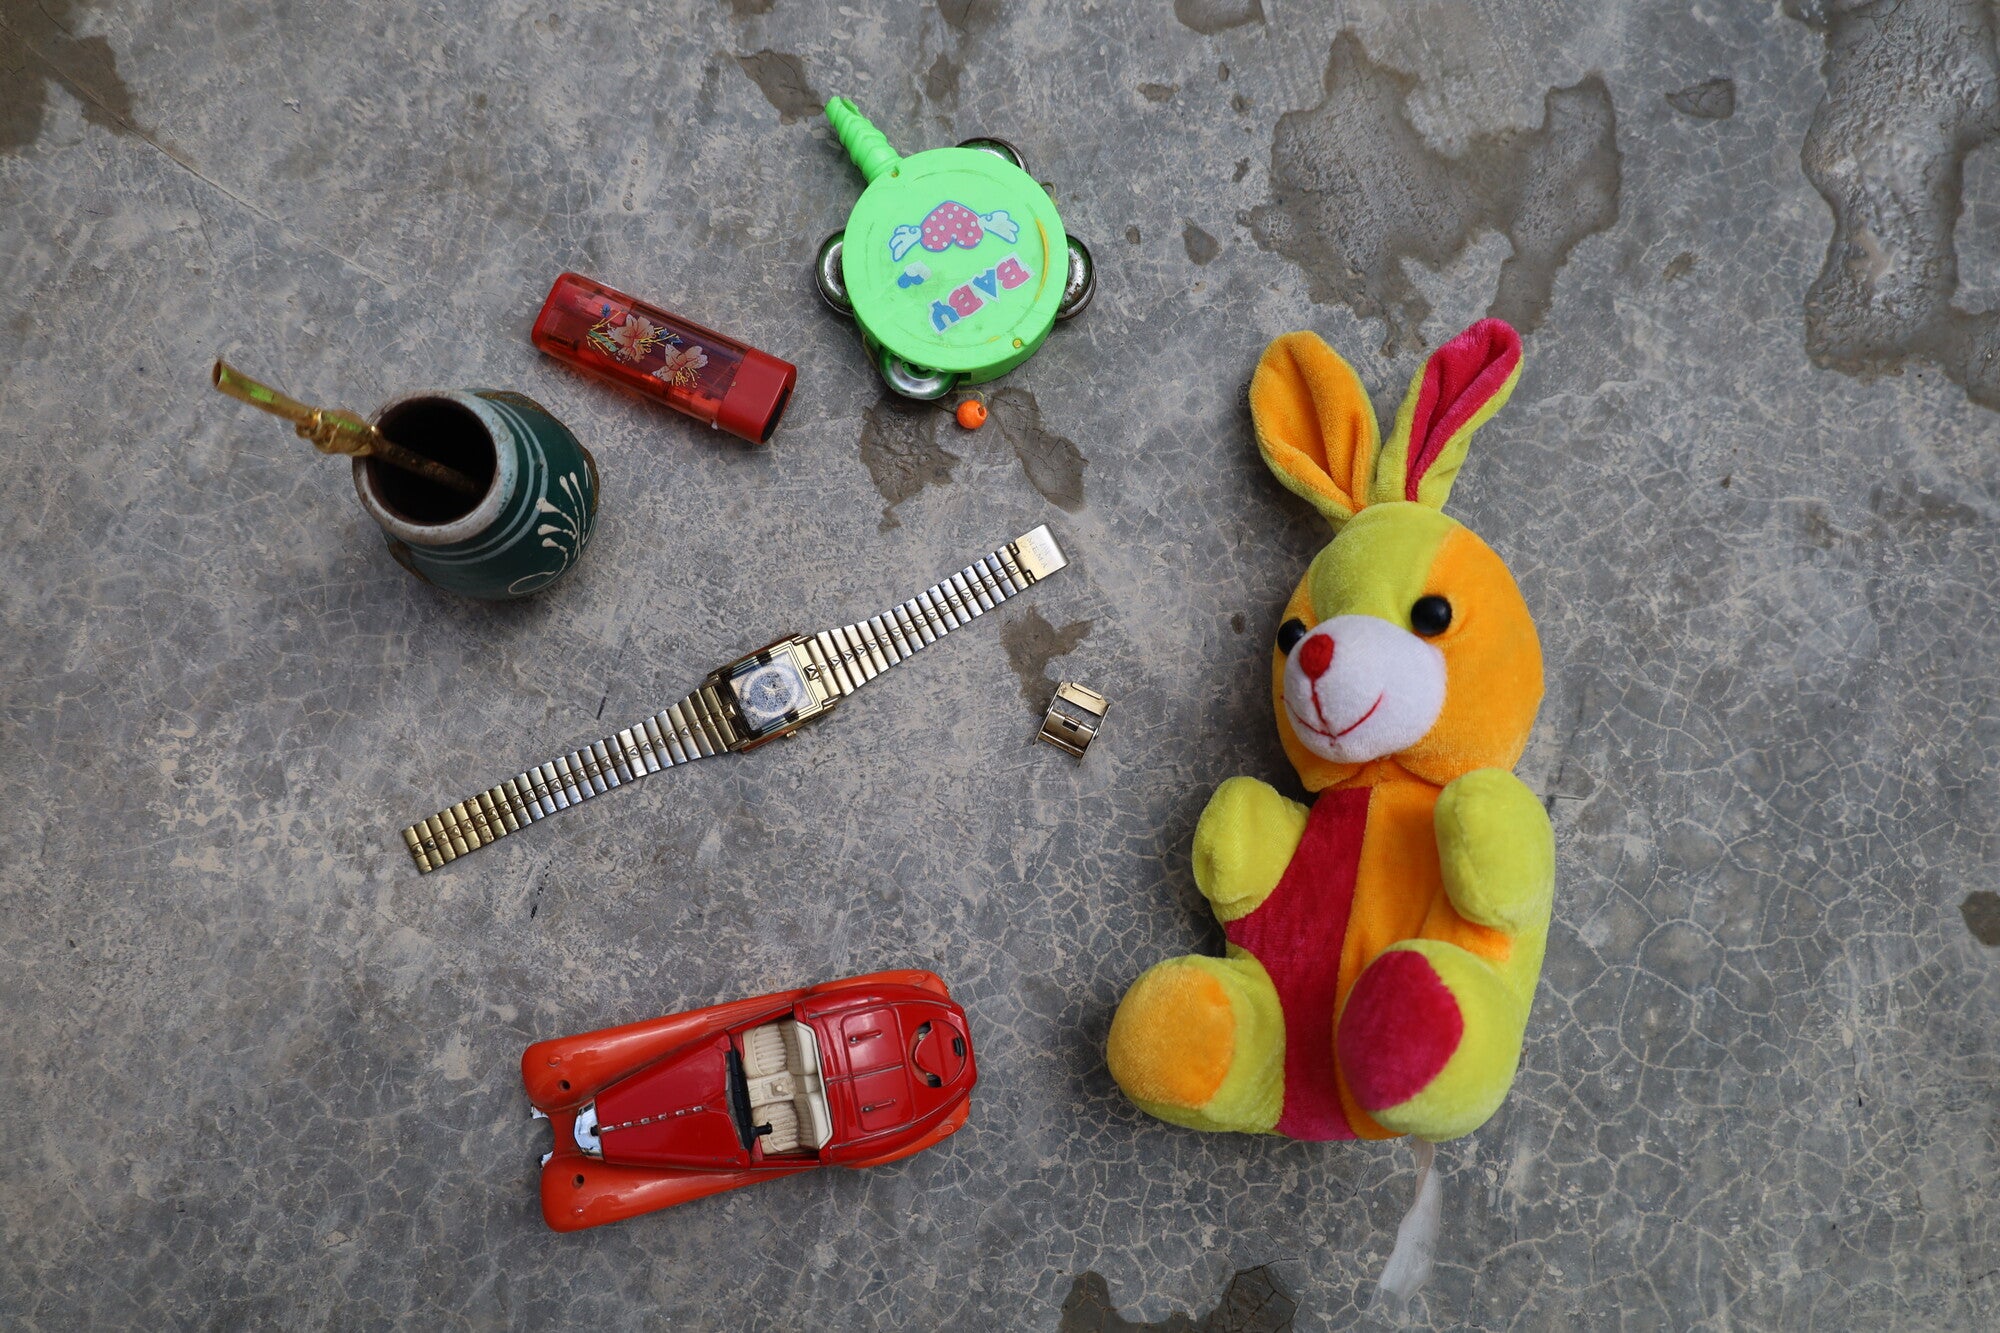 An assortment of objects, including a watch, stuffed rabbit, toy car, and mug with straw.